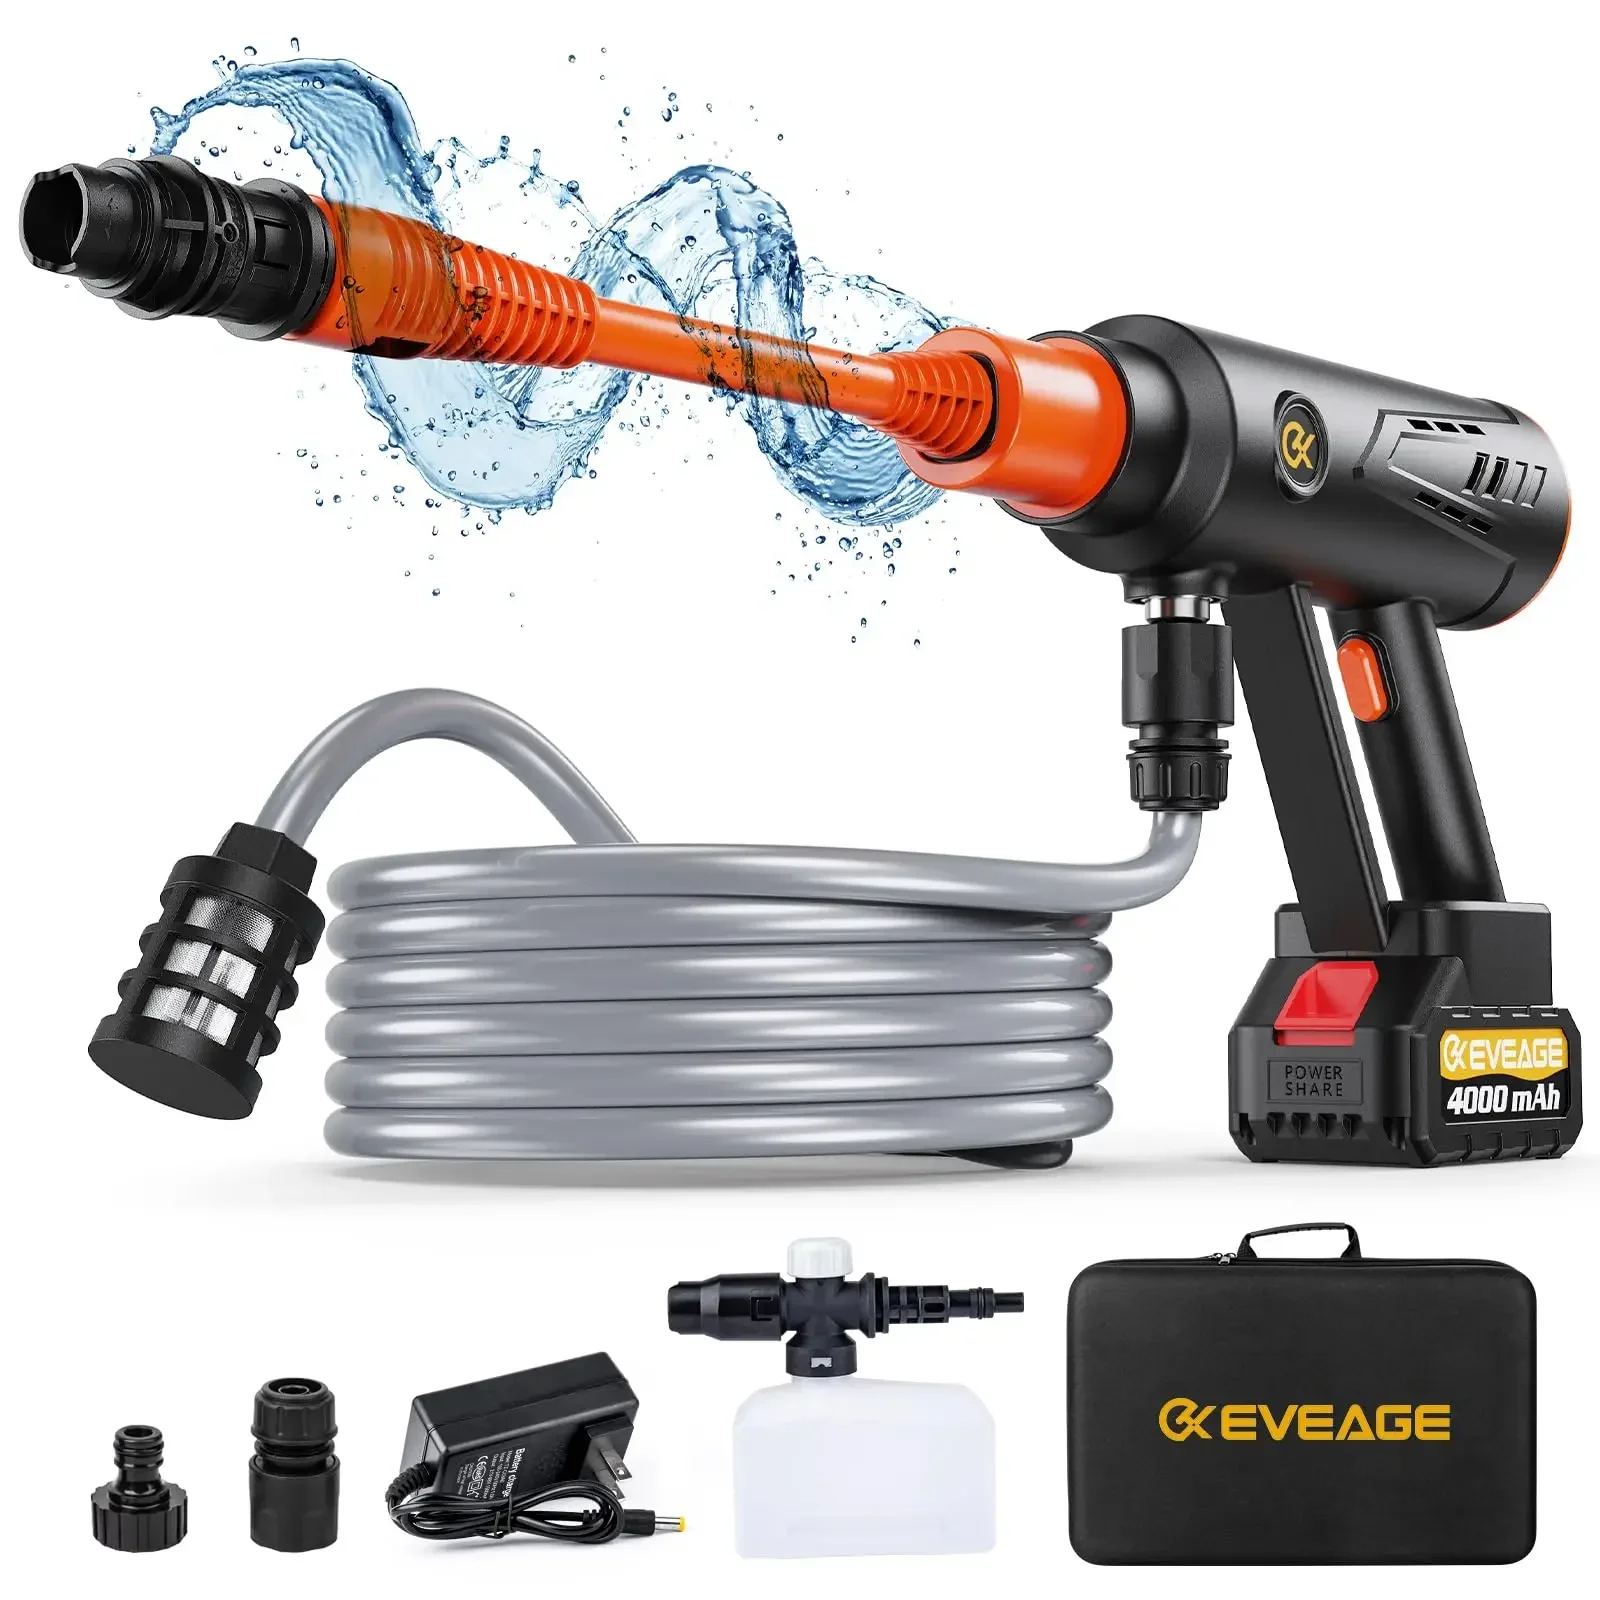 

EVEAGE Q7 Cordless Power Pressure Washer, MAX 1000PSI, 2.5GPM Adjustment Portable Power Cleaner, Rechargeable Battery Powered Ha